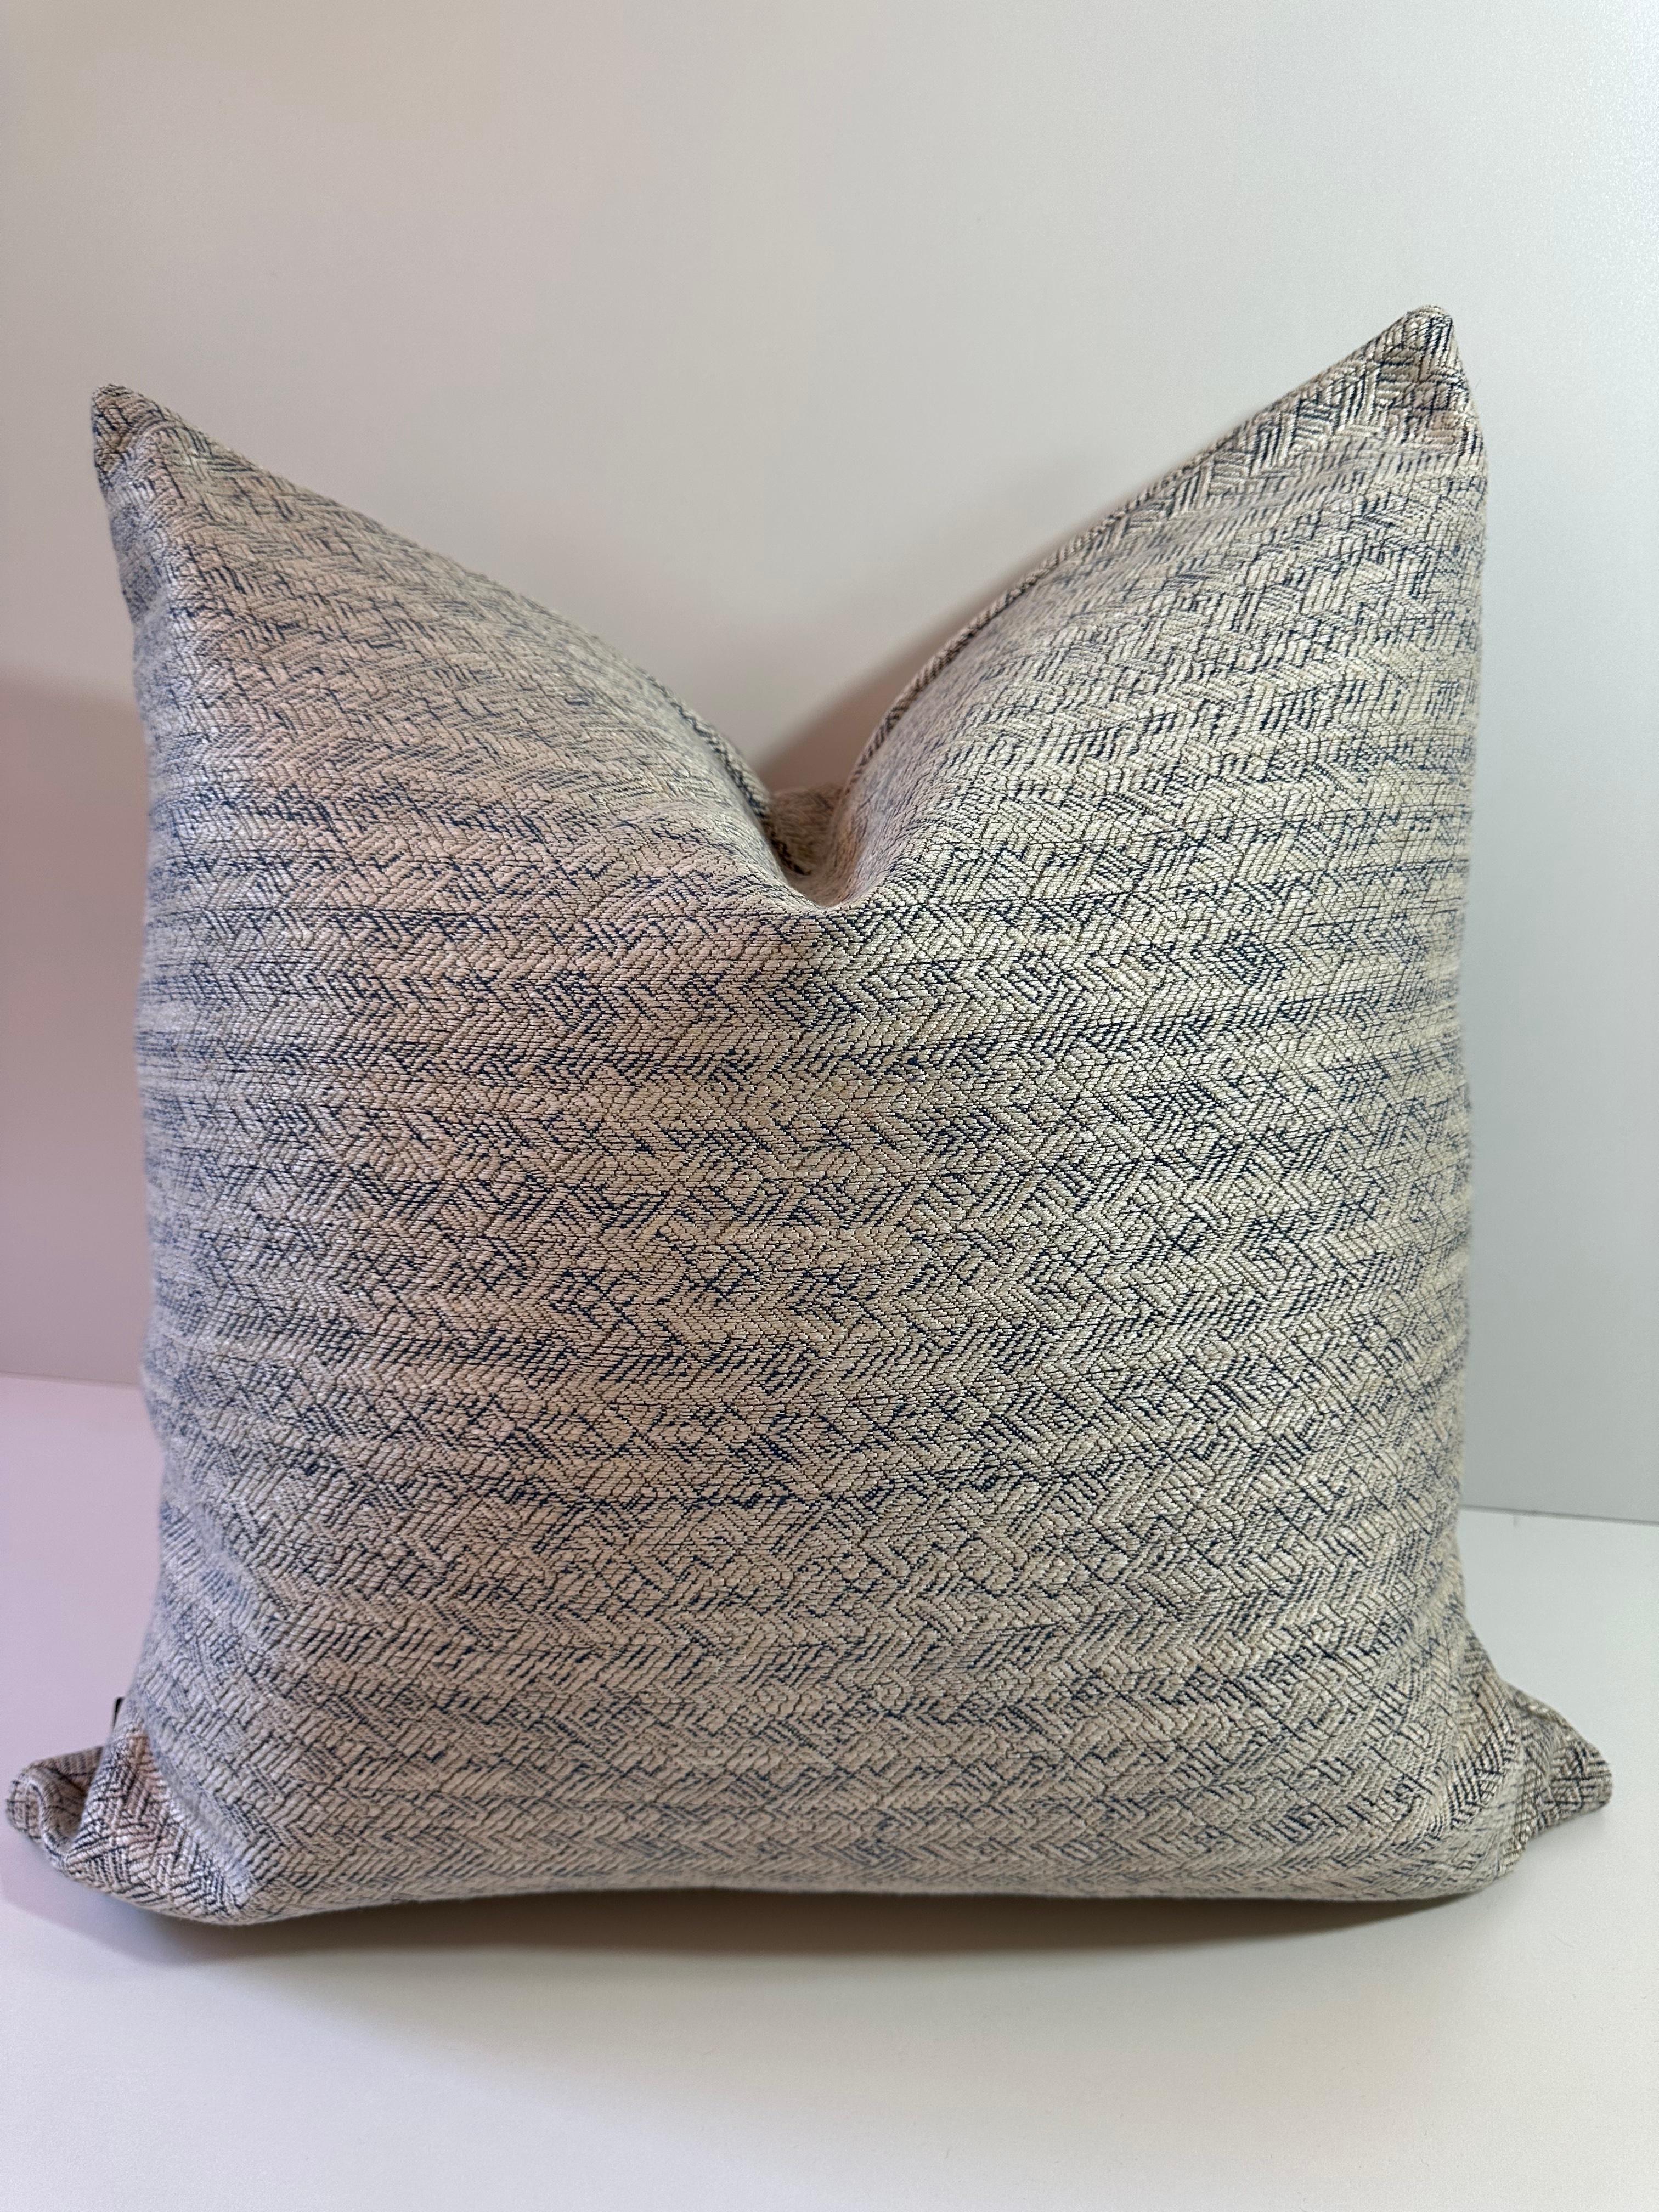 American Linen and cotton blend white & navy throw pillow- by Mar de Doce For Sale